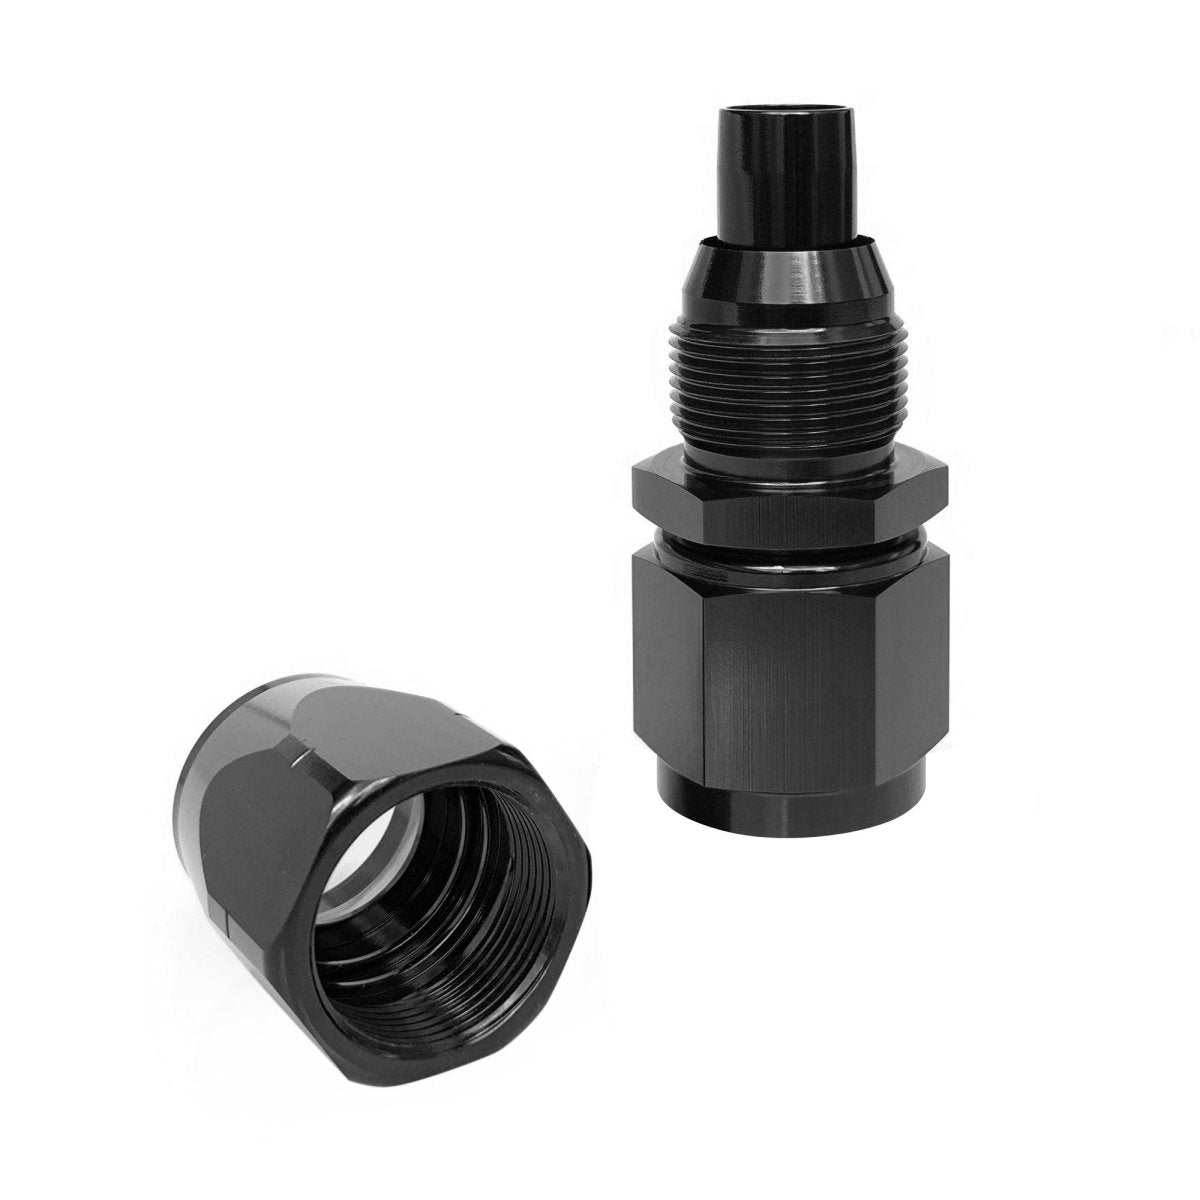 Straight Braided Hose Fitting - 800104BK by AN3 Parts